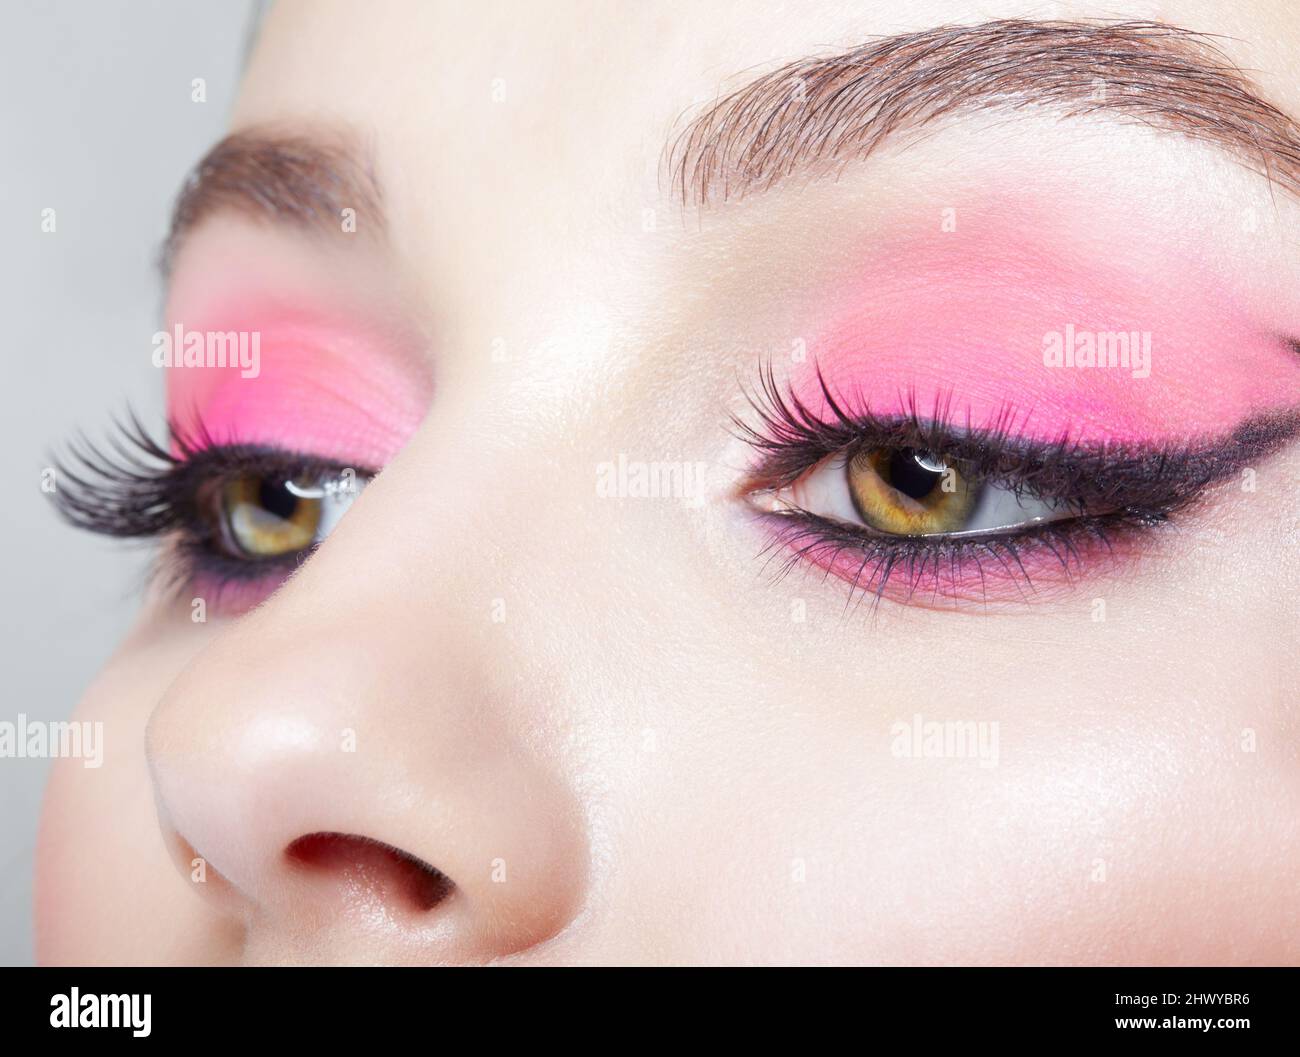 Closeup macro shot of human female face. Woman with an oriental appearance and pink eyes beauty makeup. Stock Photo